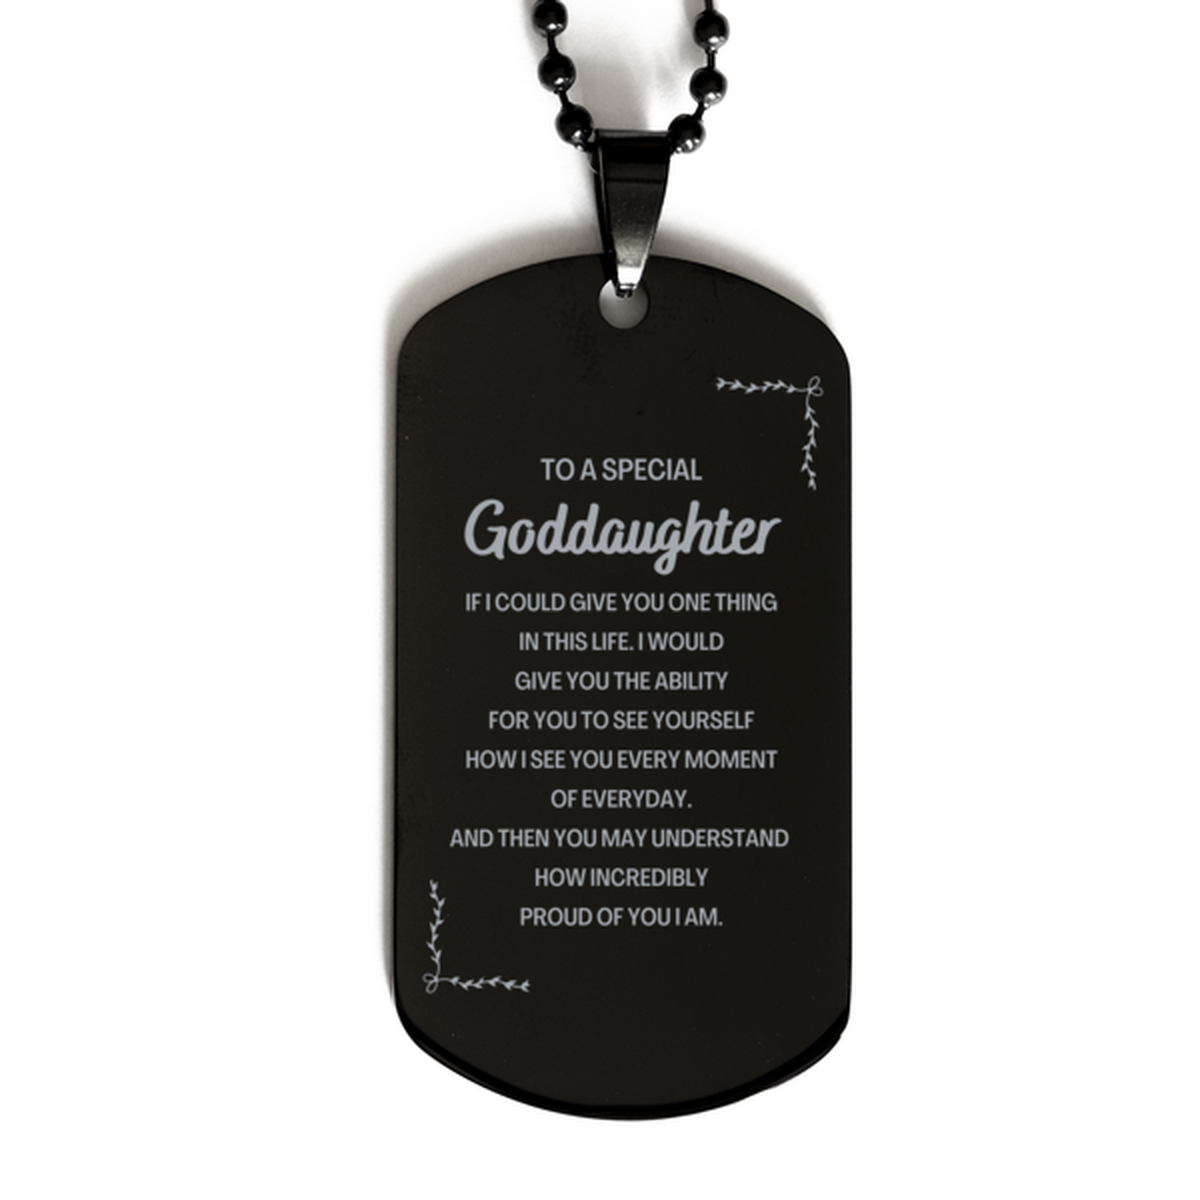 To My Goddaughter Black Dog Tag, Gifts For Goddaughter Engraved, Inspirational Gifts for Christmas Birthday, Epic Gifts for Goddaughter To A Special Goddaughter how incredibly proud of you I am